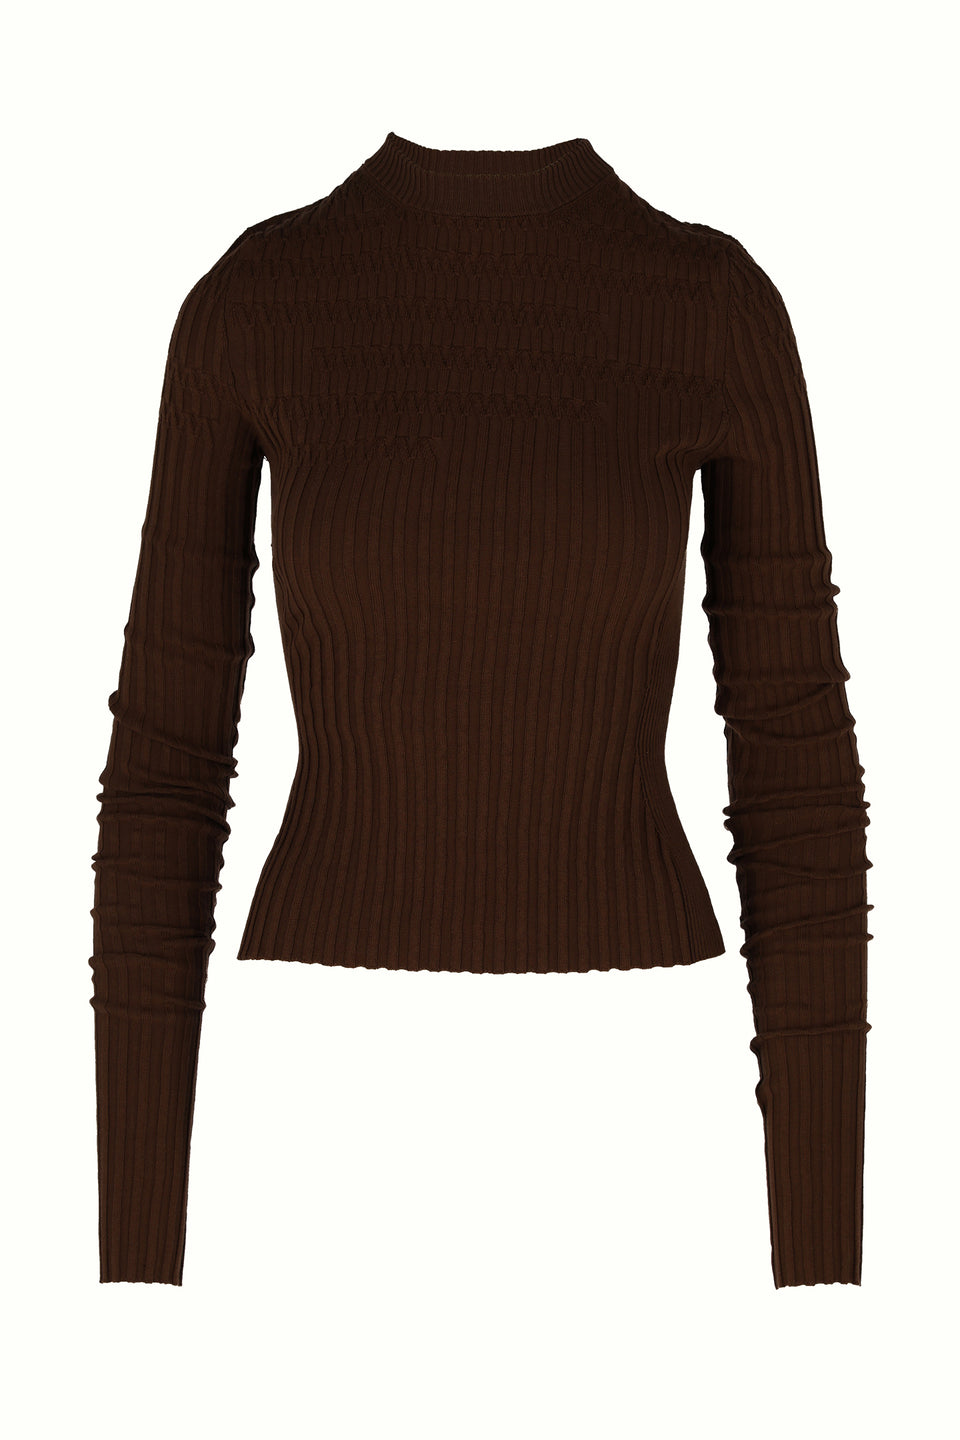 KNIT FITTED LONG SLEEVE TOP